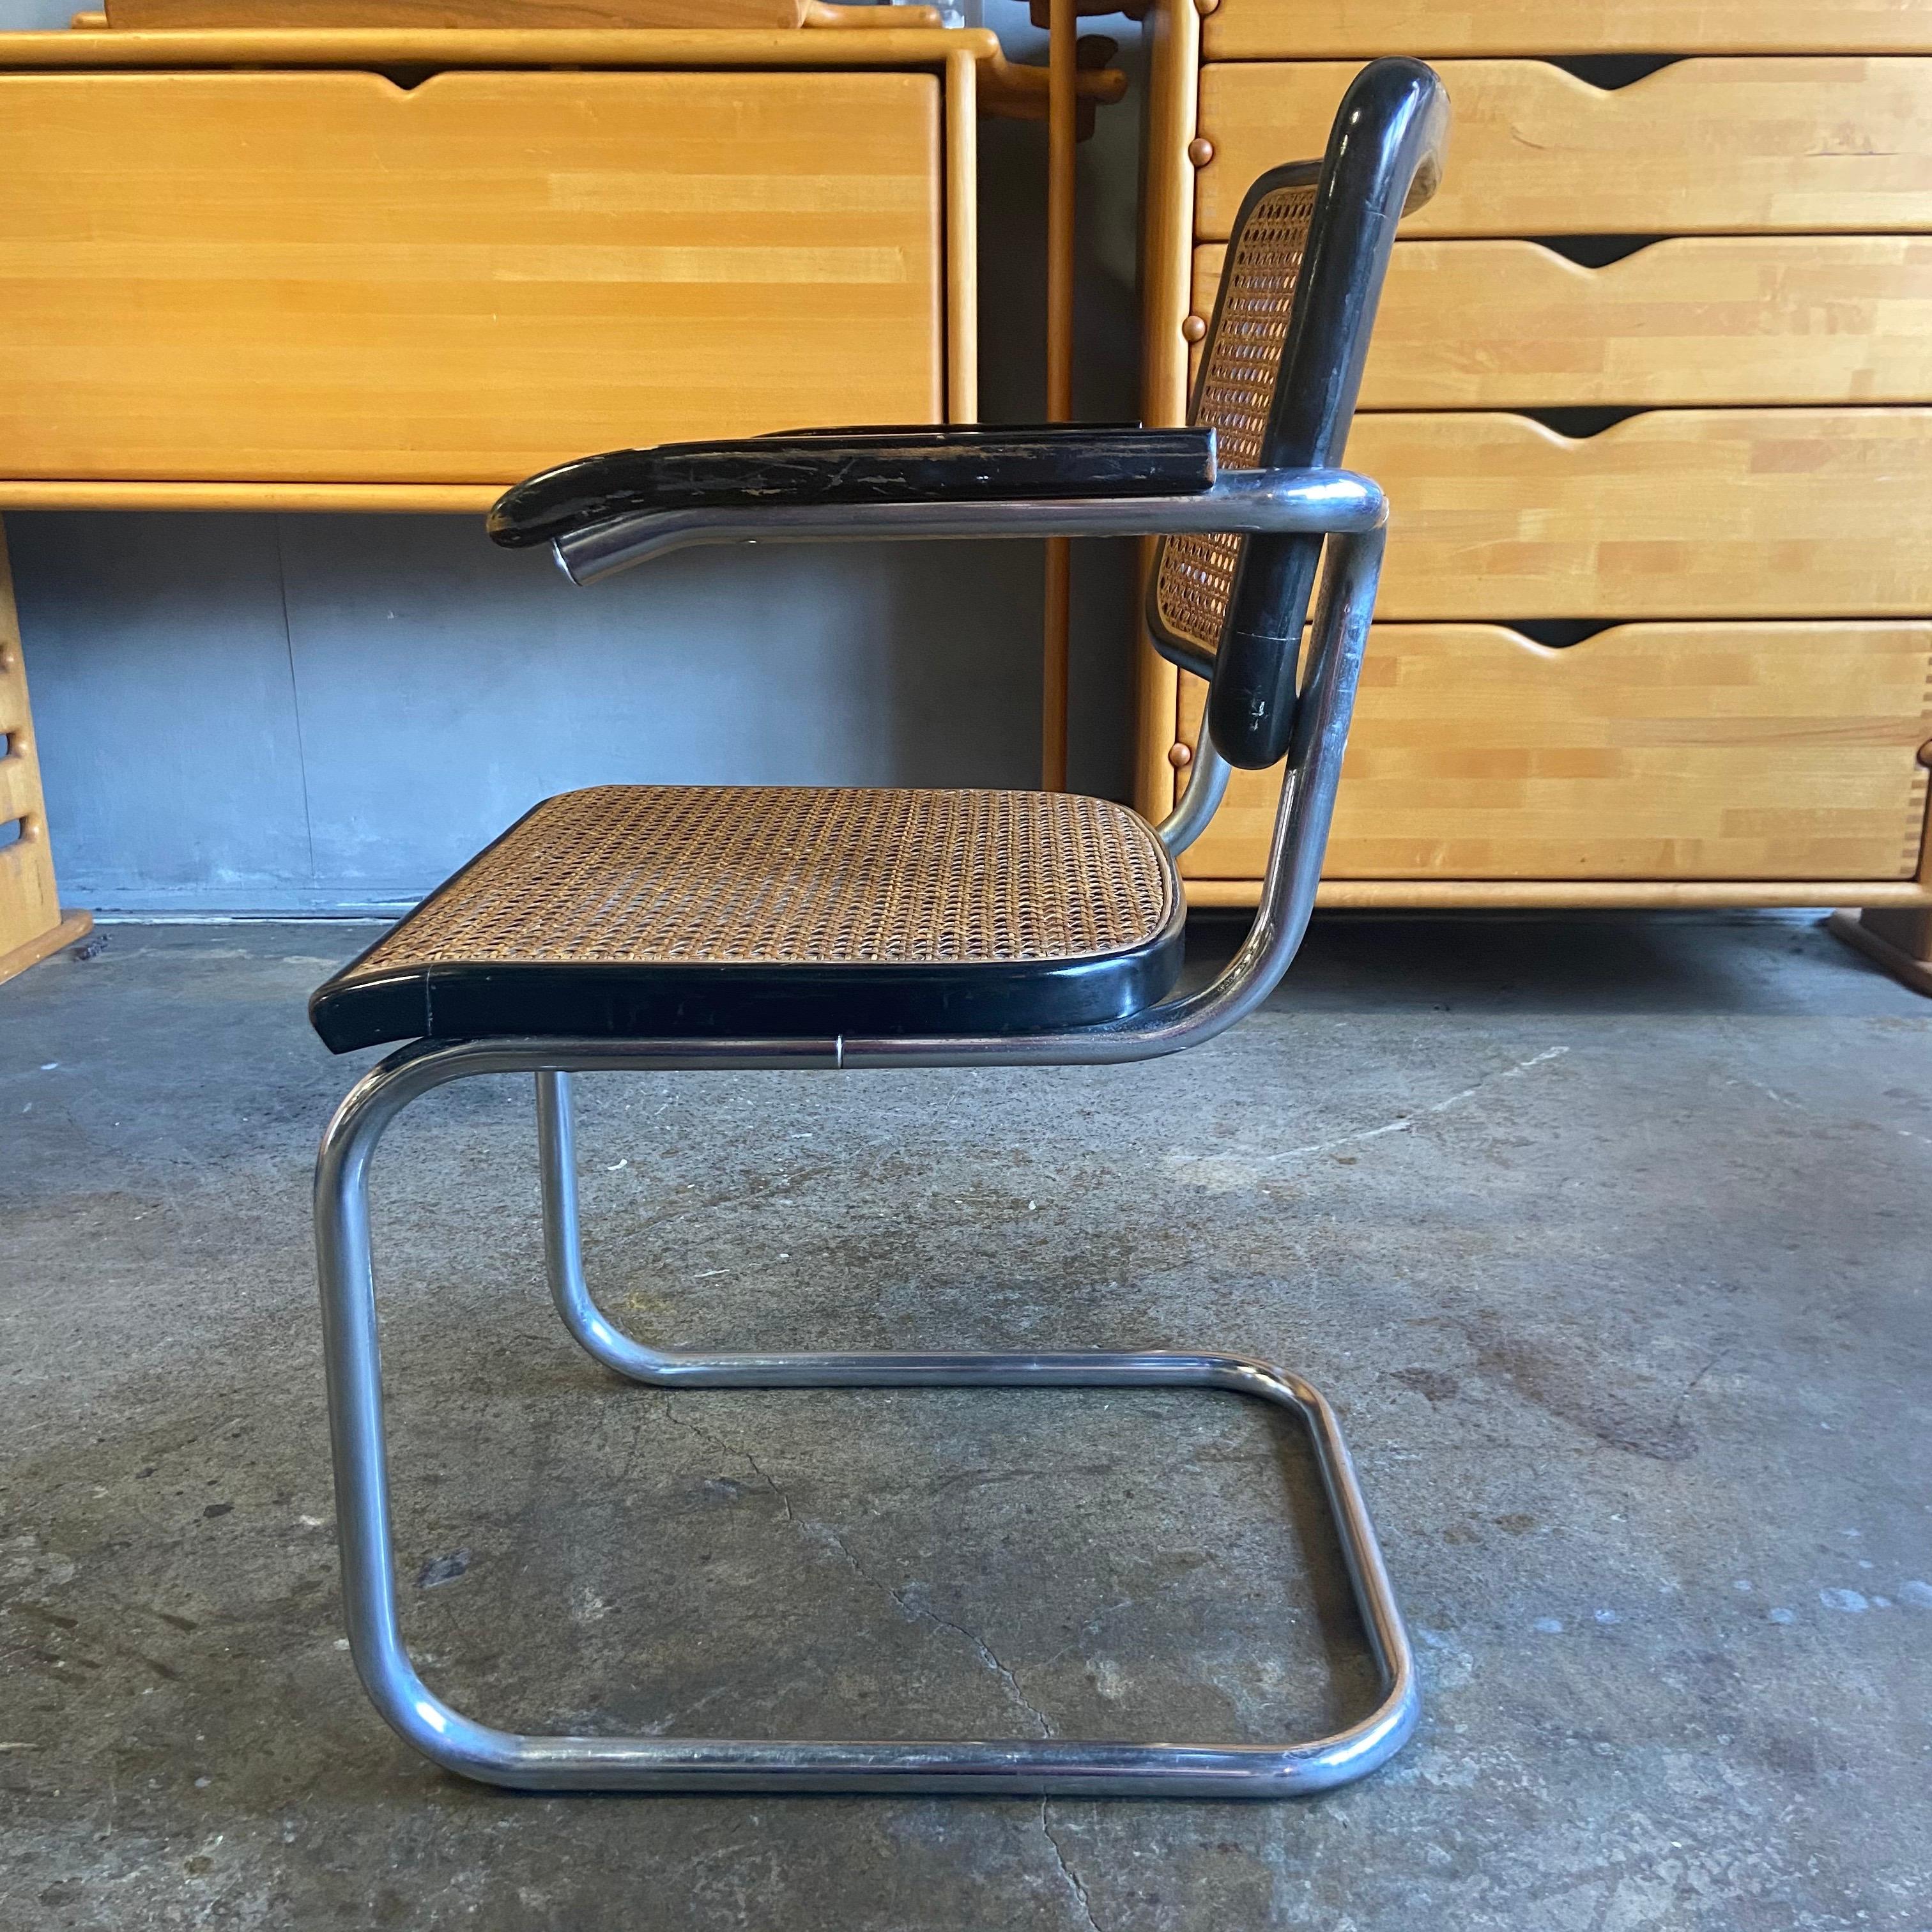 
For your consideration is this beautiful Cesca by Marcel Breuer for Thonet from the 1940's. Nearly a century old with incredible patina. Original black lacquer frame and canework on chrome frame. Retains the original label. 

This chair is simply